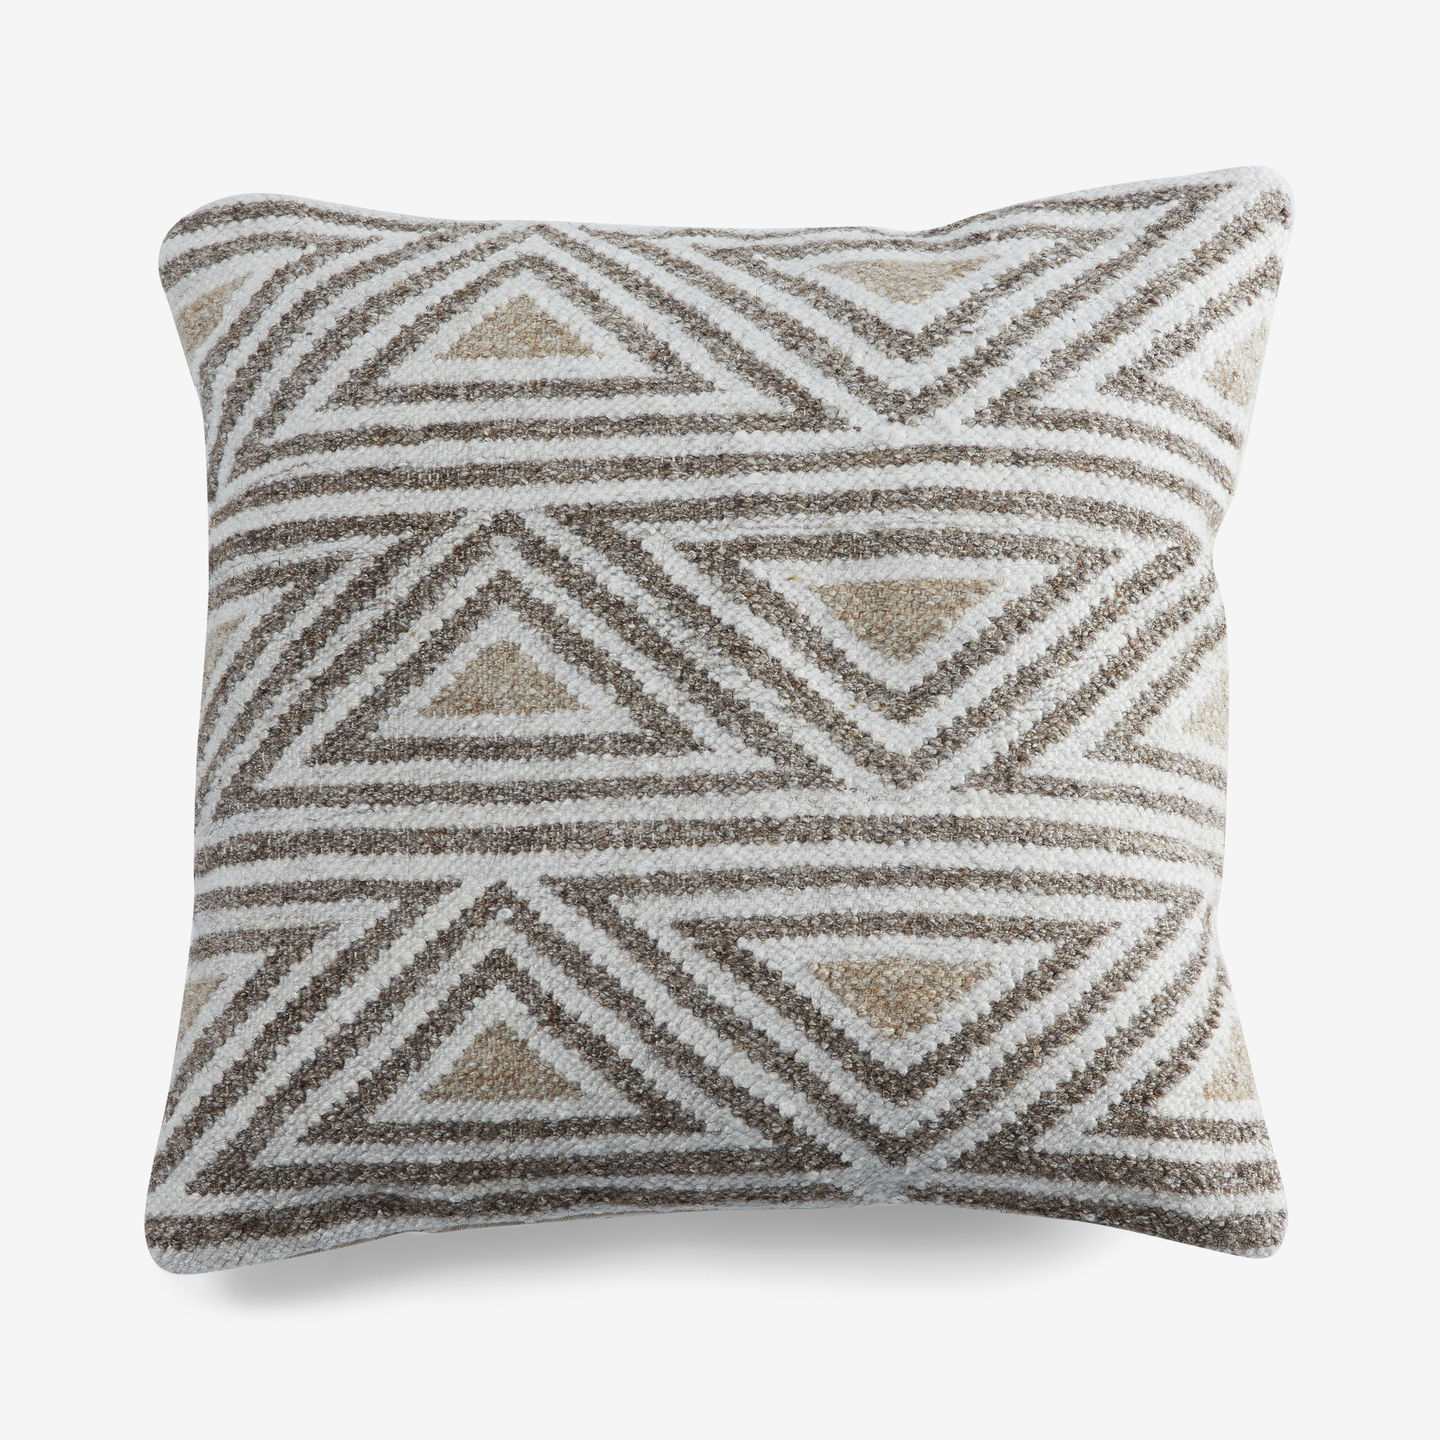 724_18in-Tula-Triangle-Pattern-Pillow_Straight-On 2020